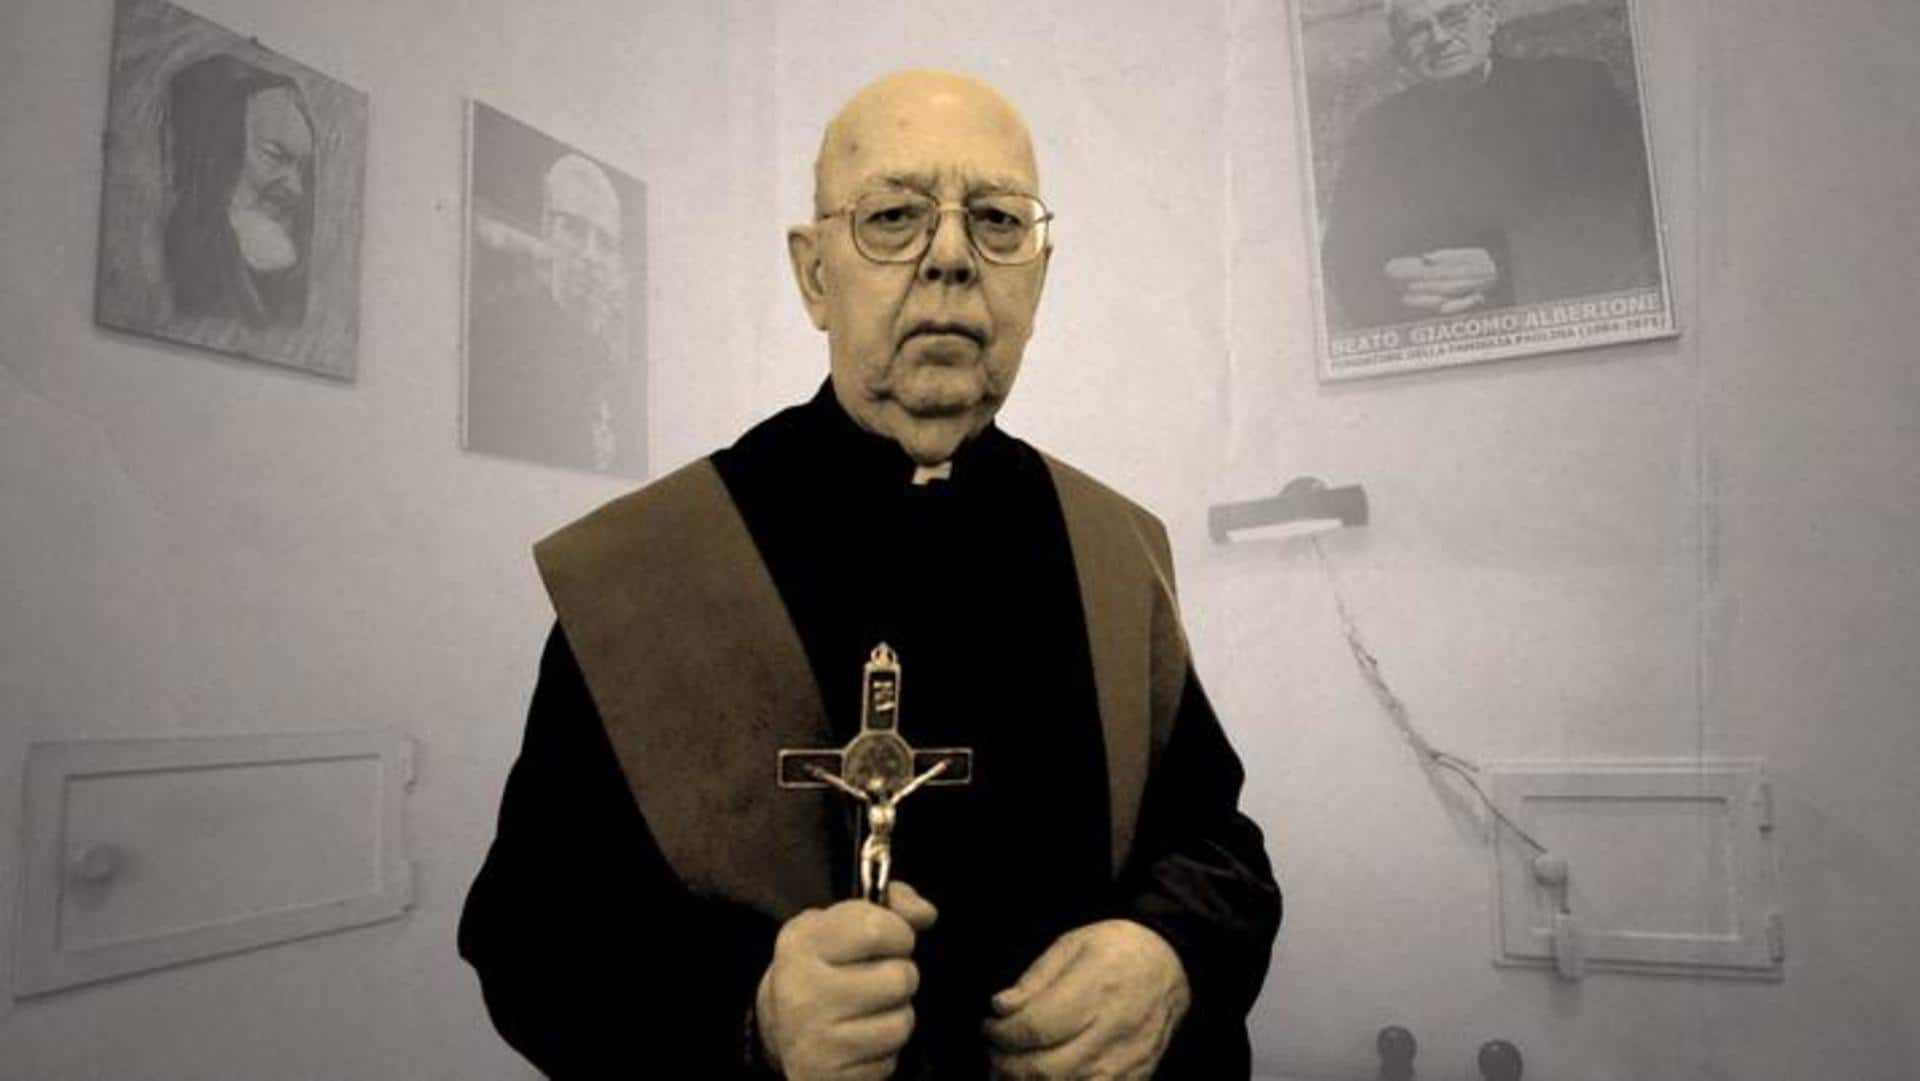 Know about Gabriele Amorth, real-life exorcist who inspired horror flick